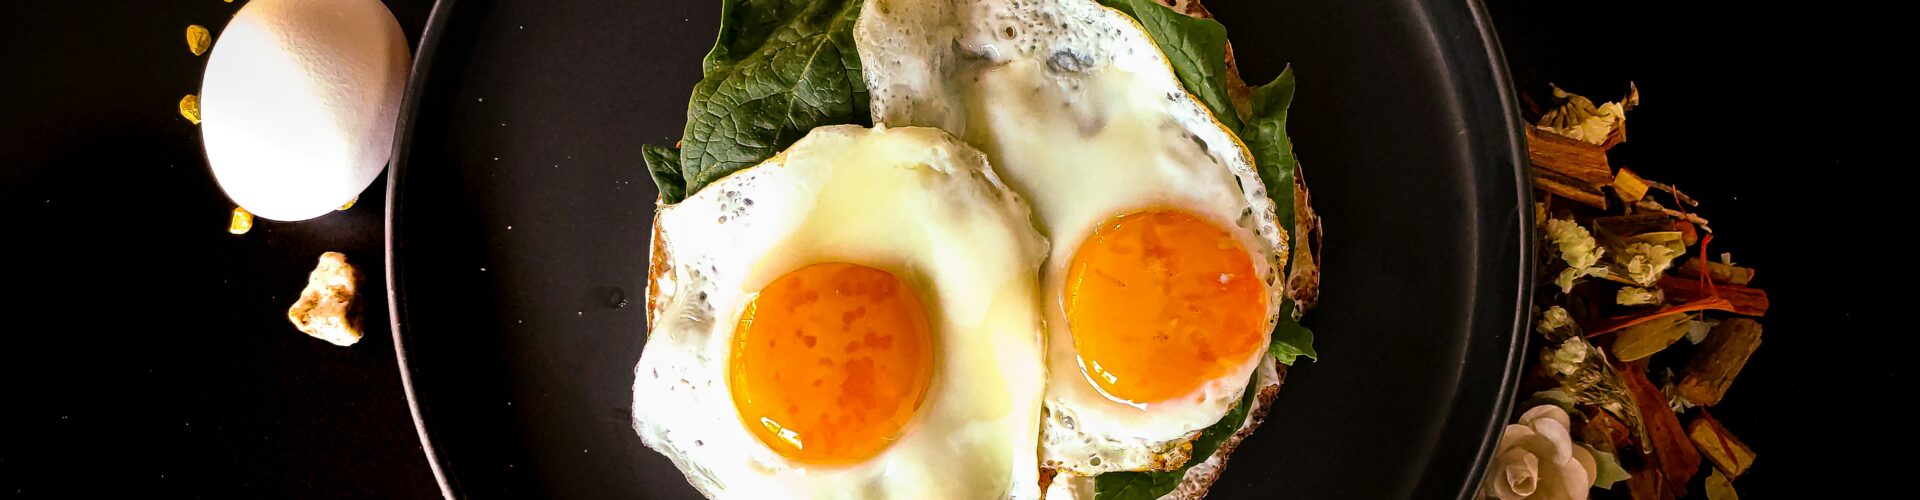 baked spinach eggs recipe